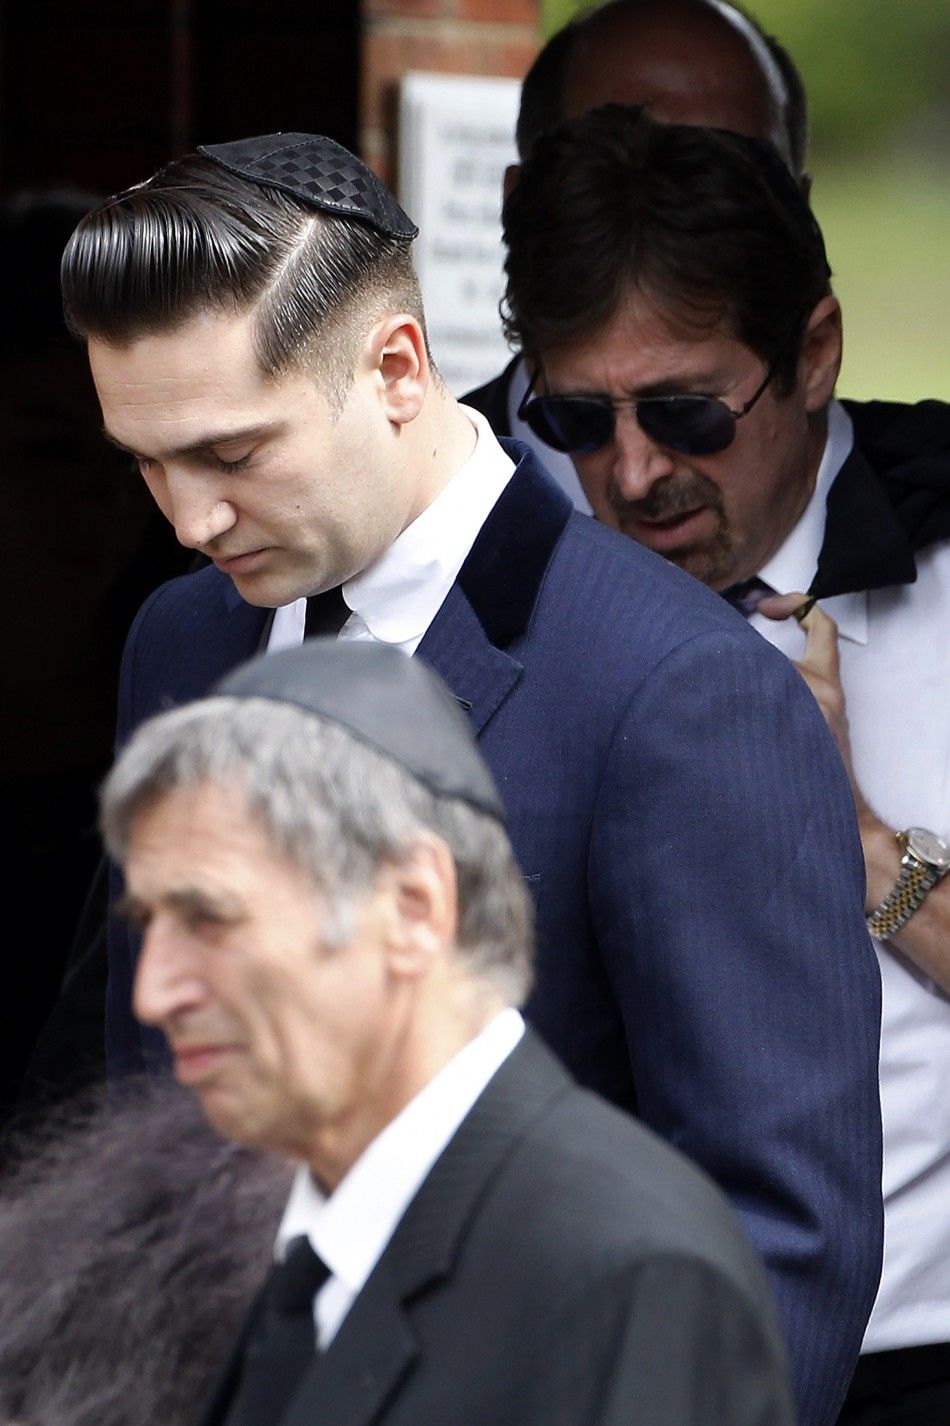 Reg Traviss, the former boyfriend of deceased British singer Amy Winehouse, leaves after her funeral at Golders Green Crematorium in north London 